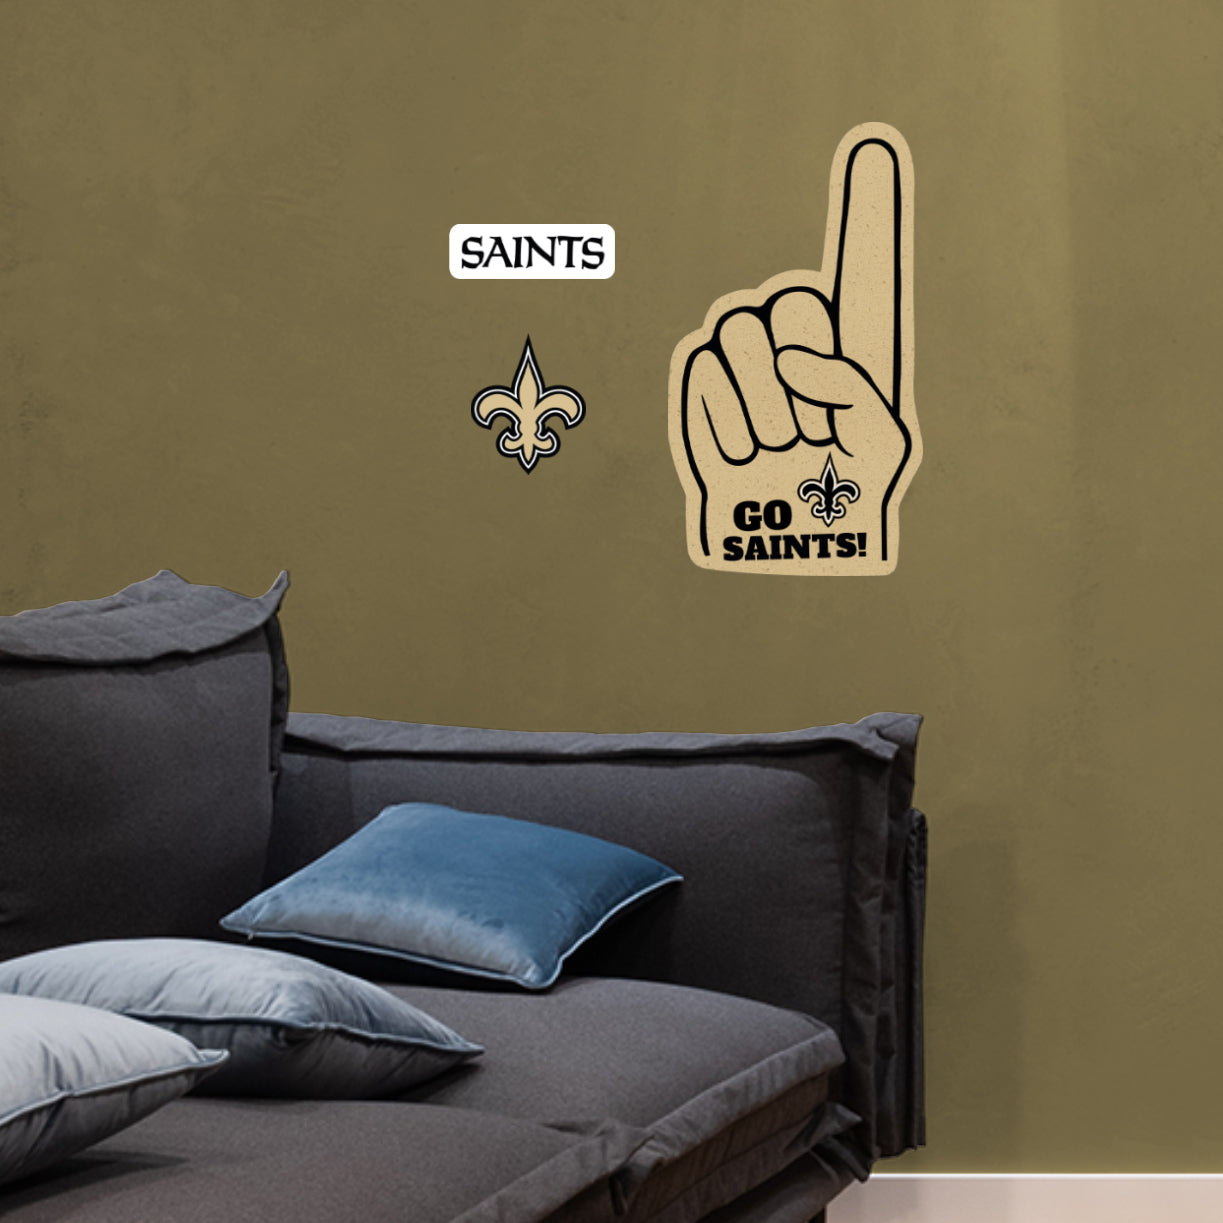 New Orleans Saints: Foam Finger - Officially Licensed NFL Removable Adhesive Decal